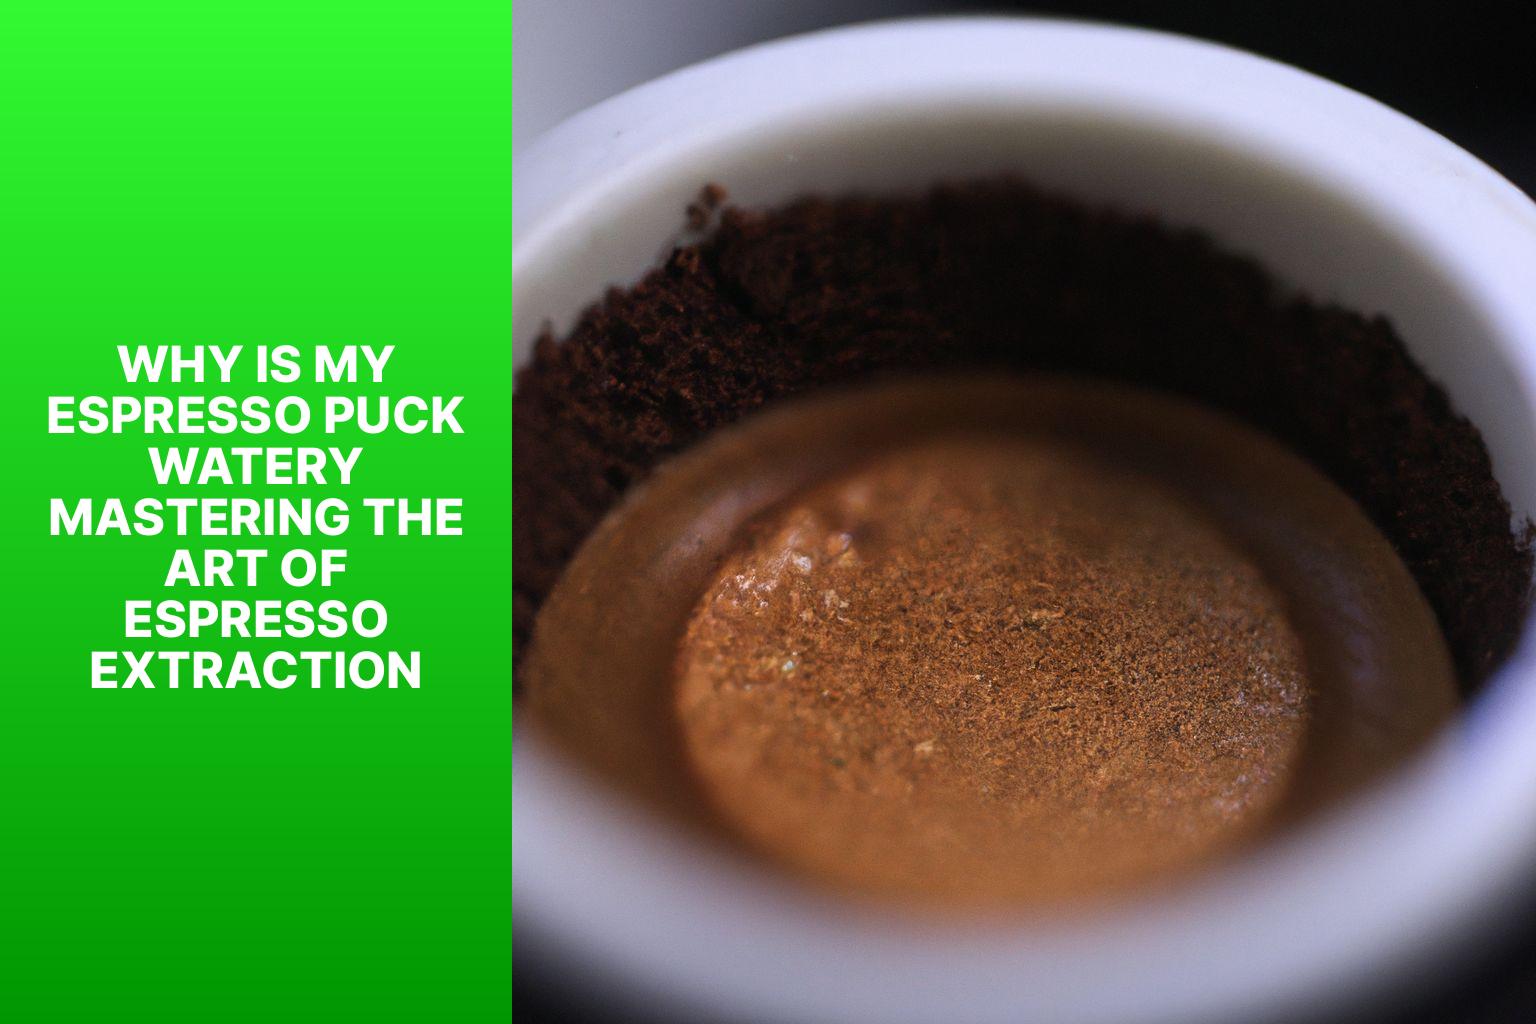 Why is My Espresso Puck Watery? Mastering the Art of Espresso Extraction